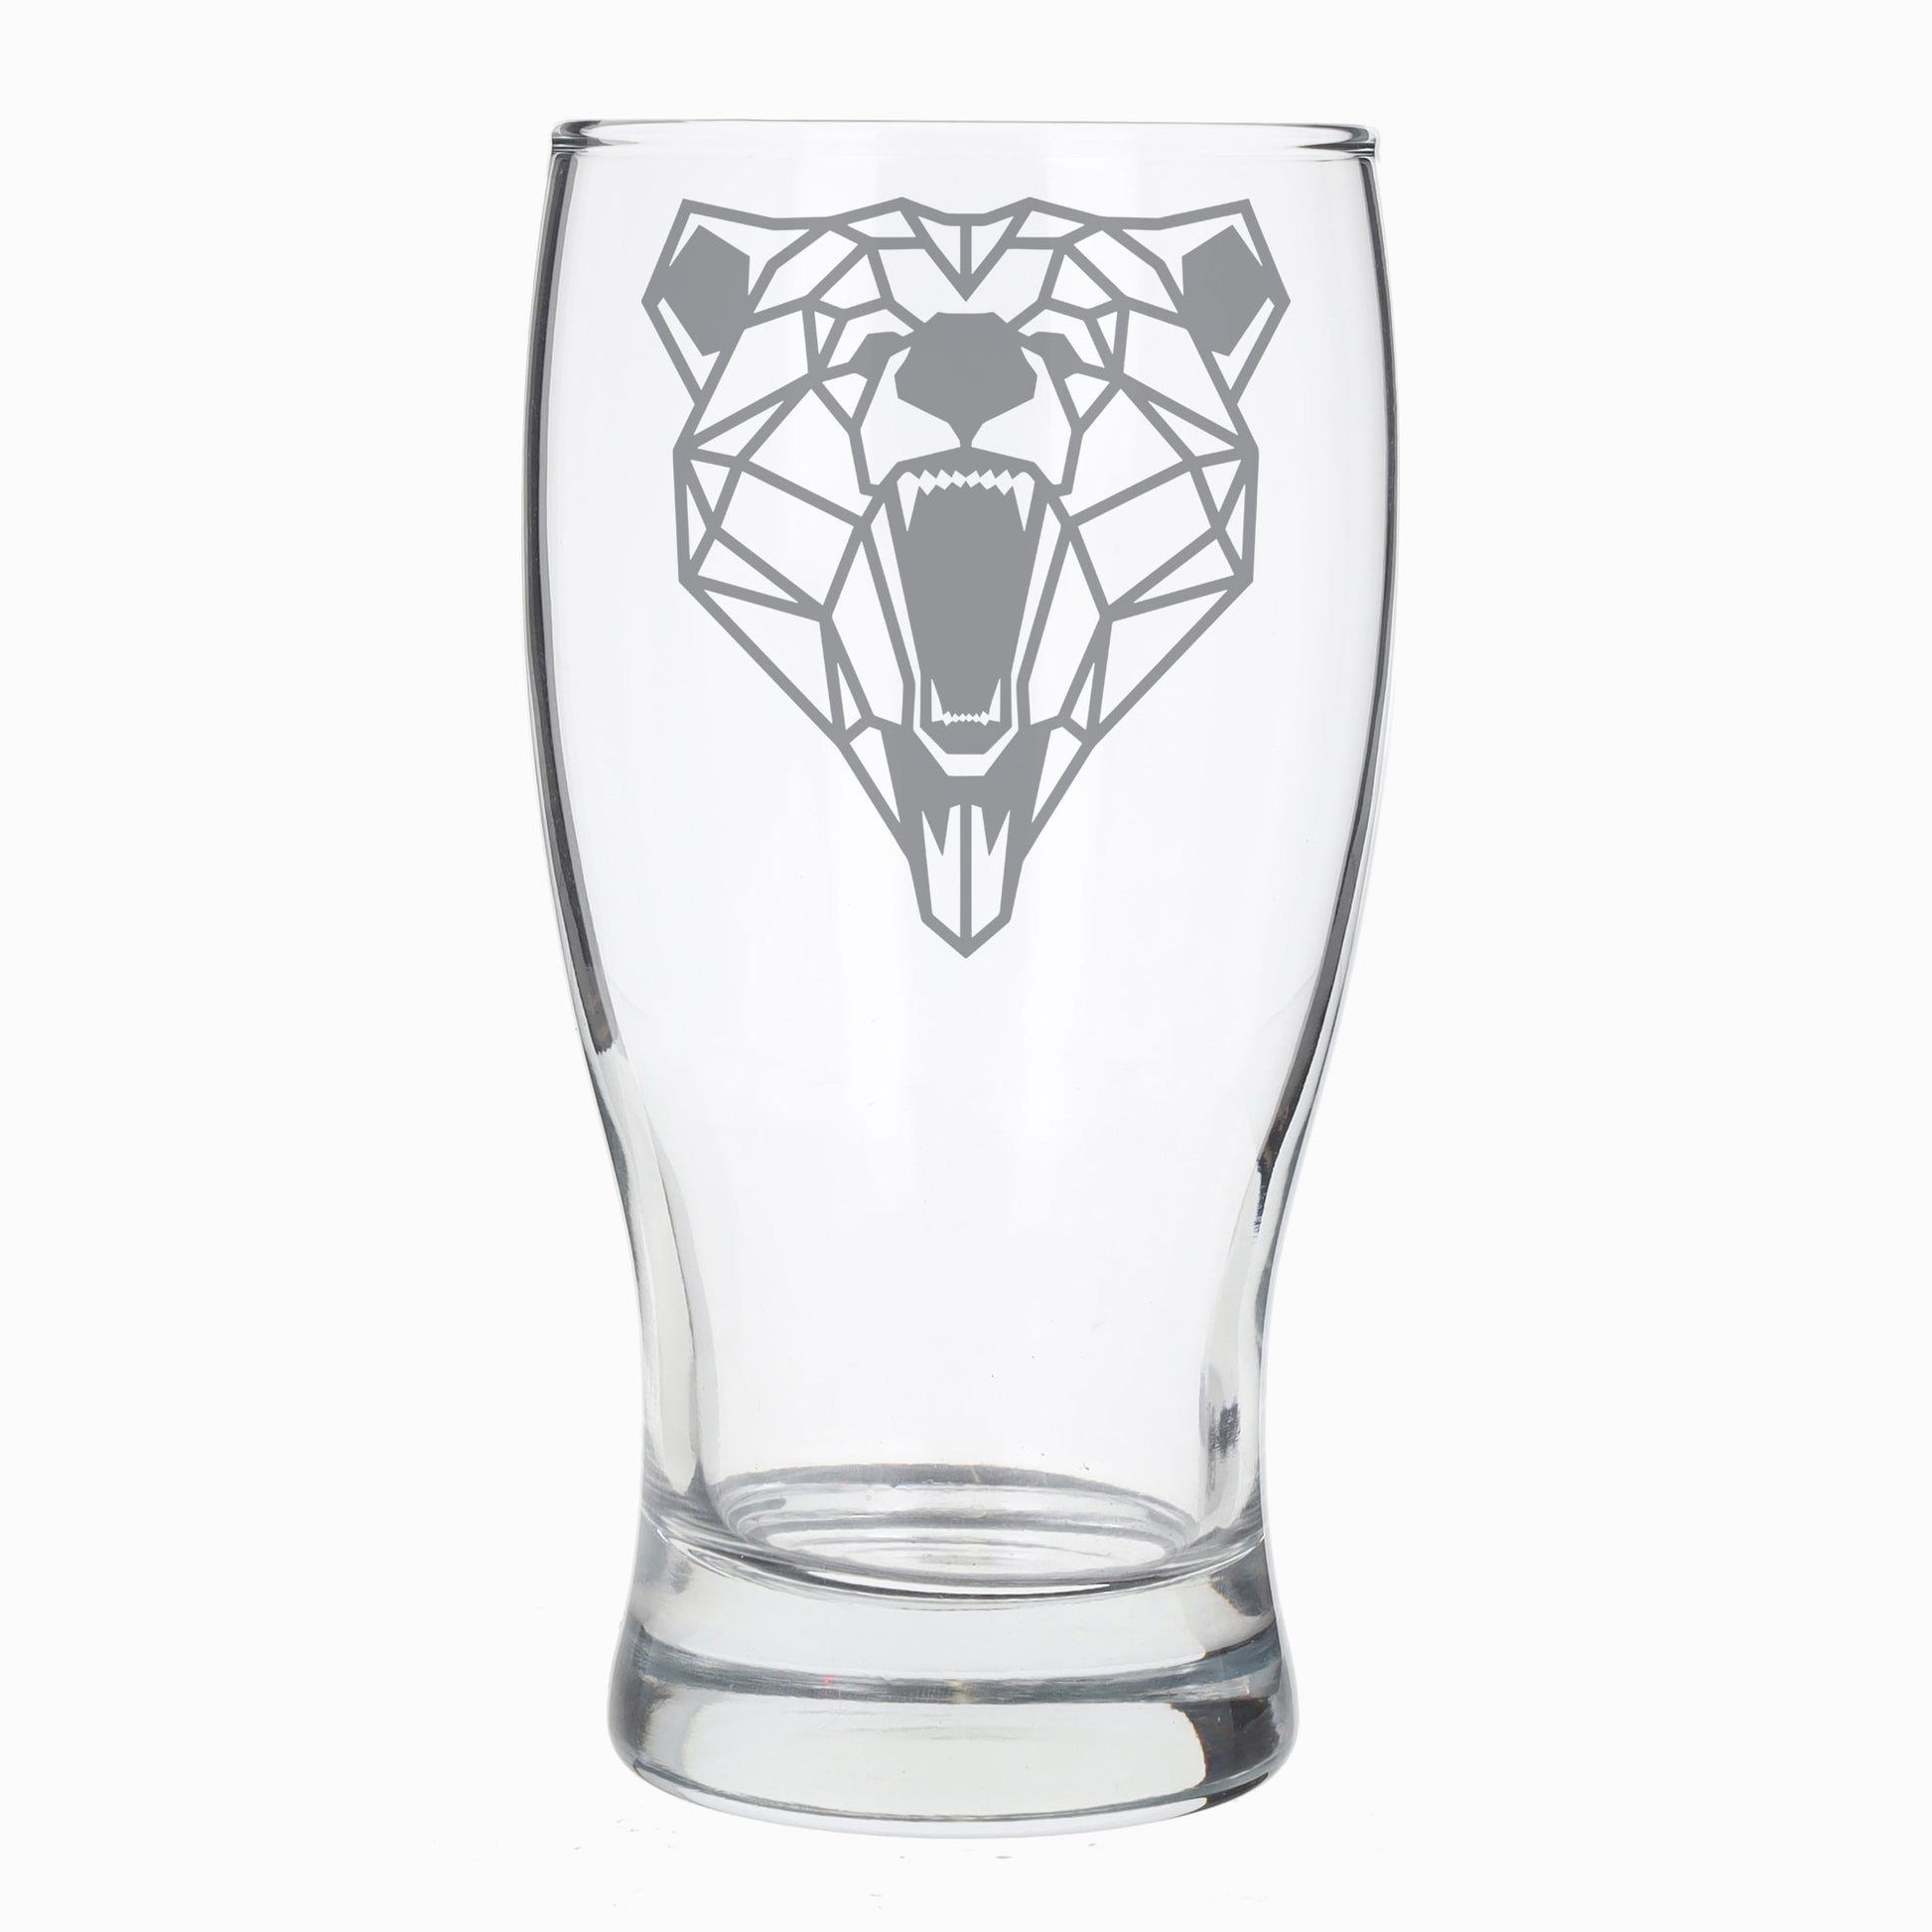 Grizzly Bear Engraved Beer Pint Glass  - Always Looking Good -   